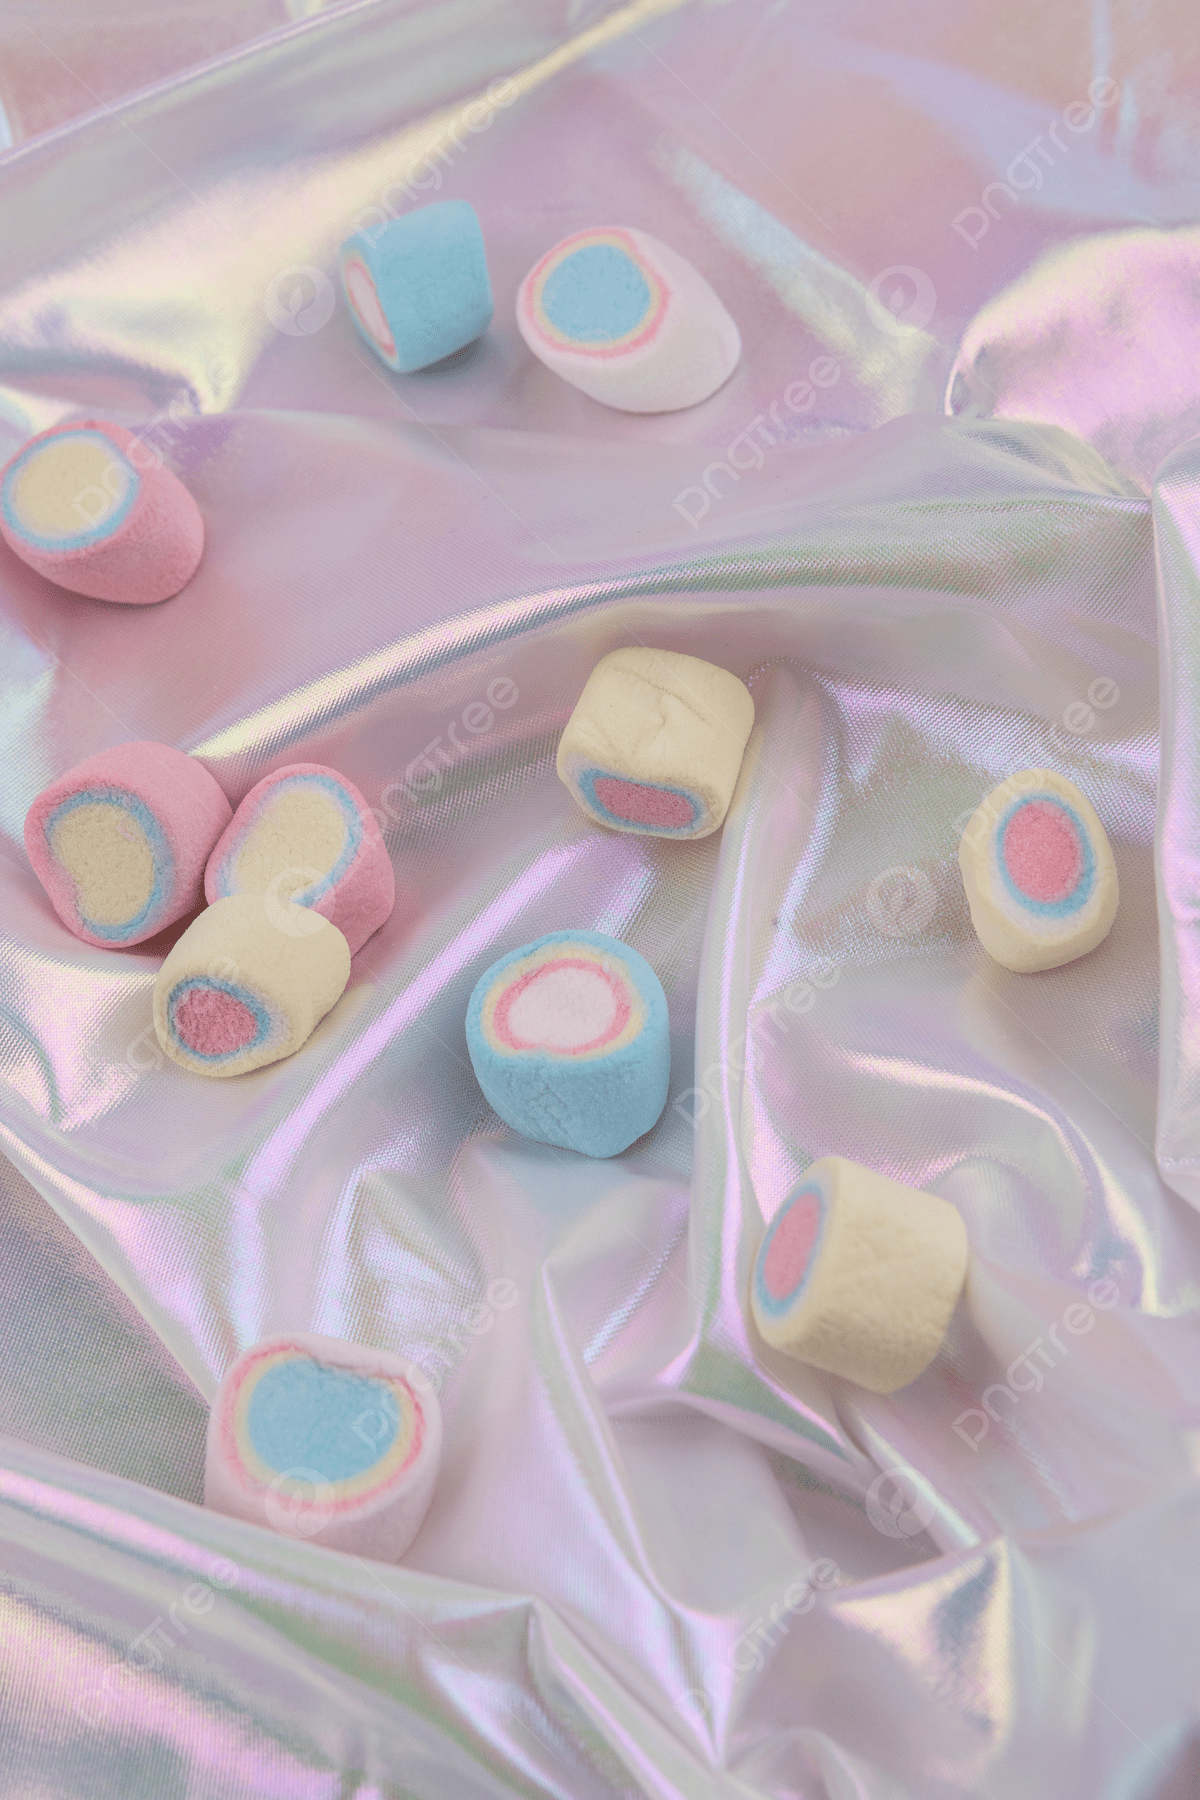 Marshmallows on a pink and blue background - Marshmallows